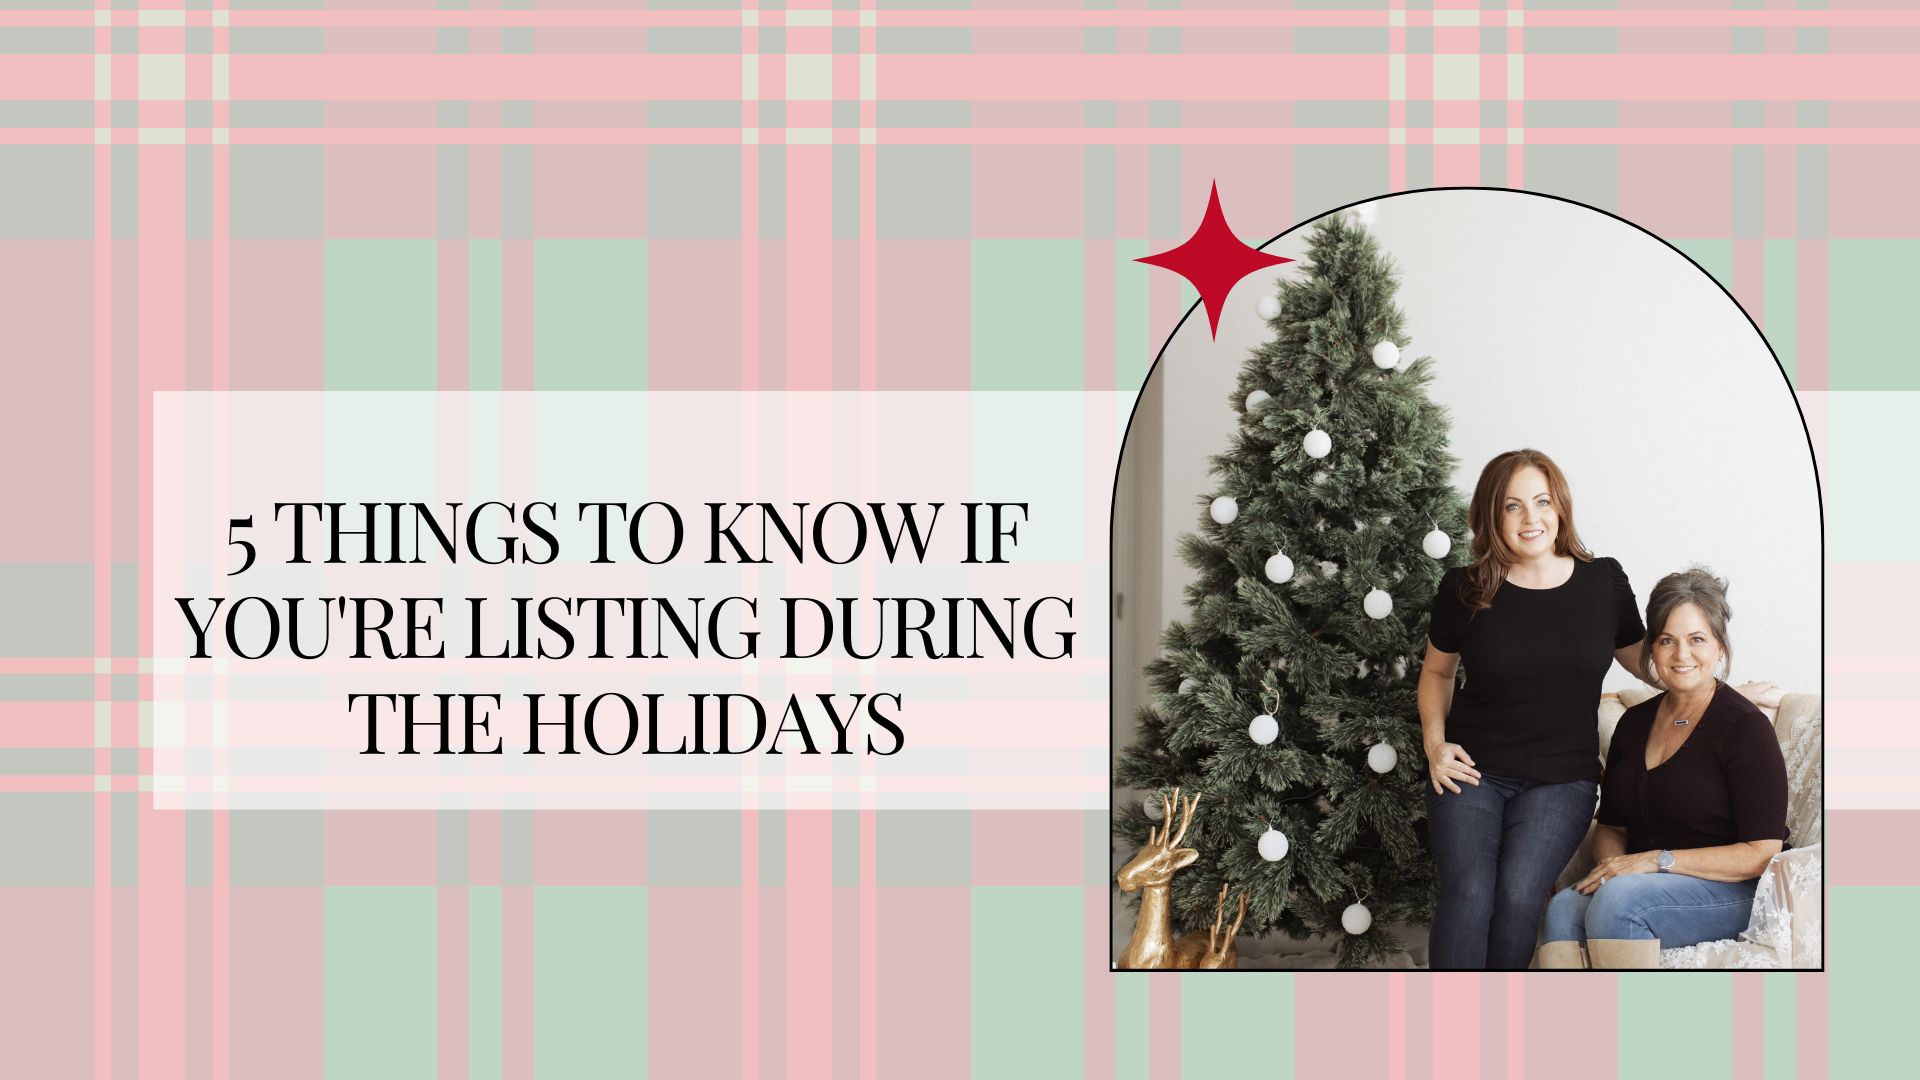 5 Things to Know if You're Listing During the Holidays